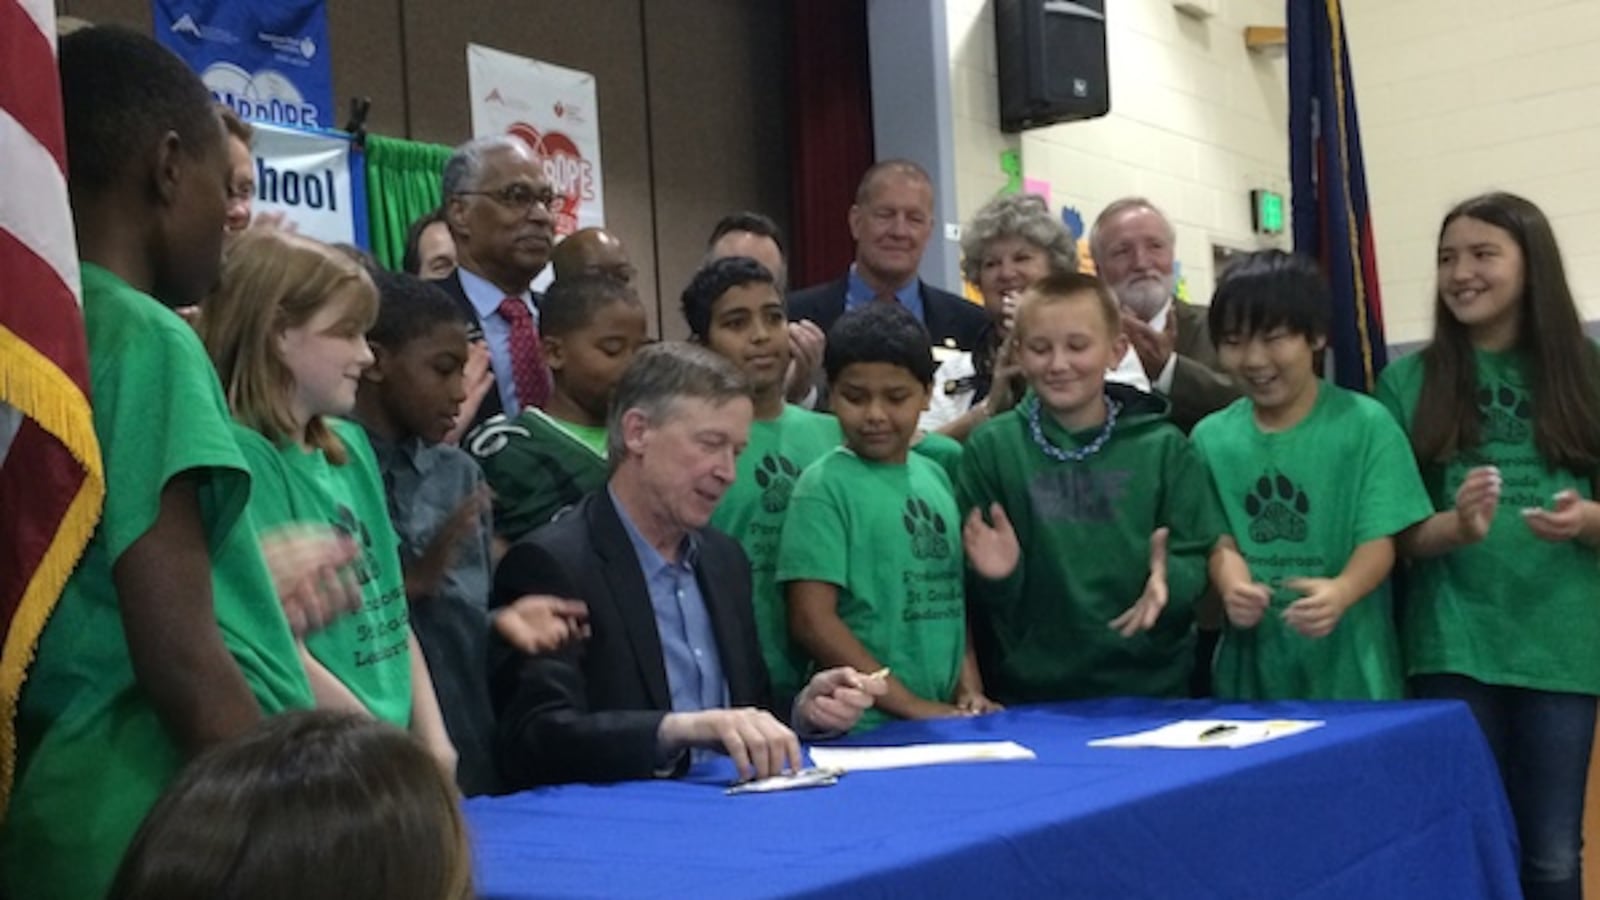 Gov. John Hickenlooper was surrounded by Ponderosa Elementary School students as he signed two 2014 K-12 funding bills.